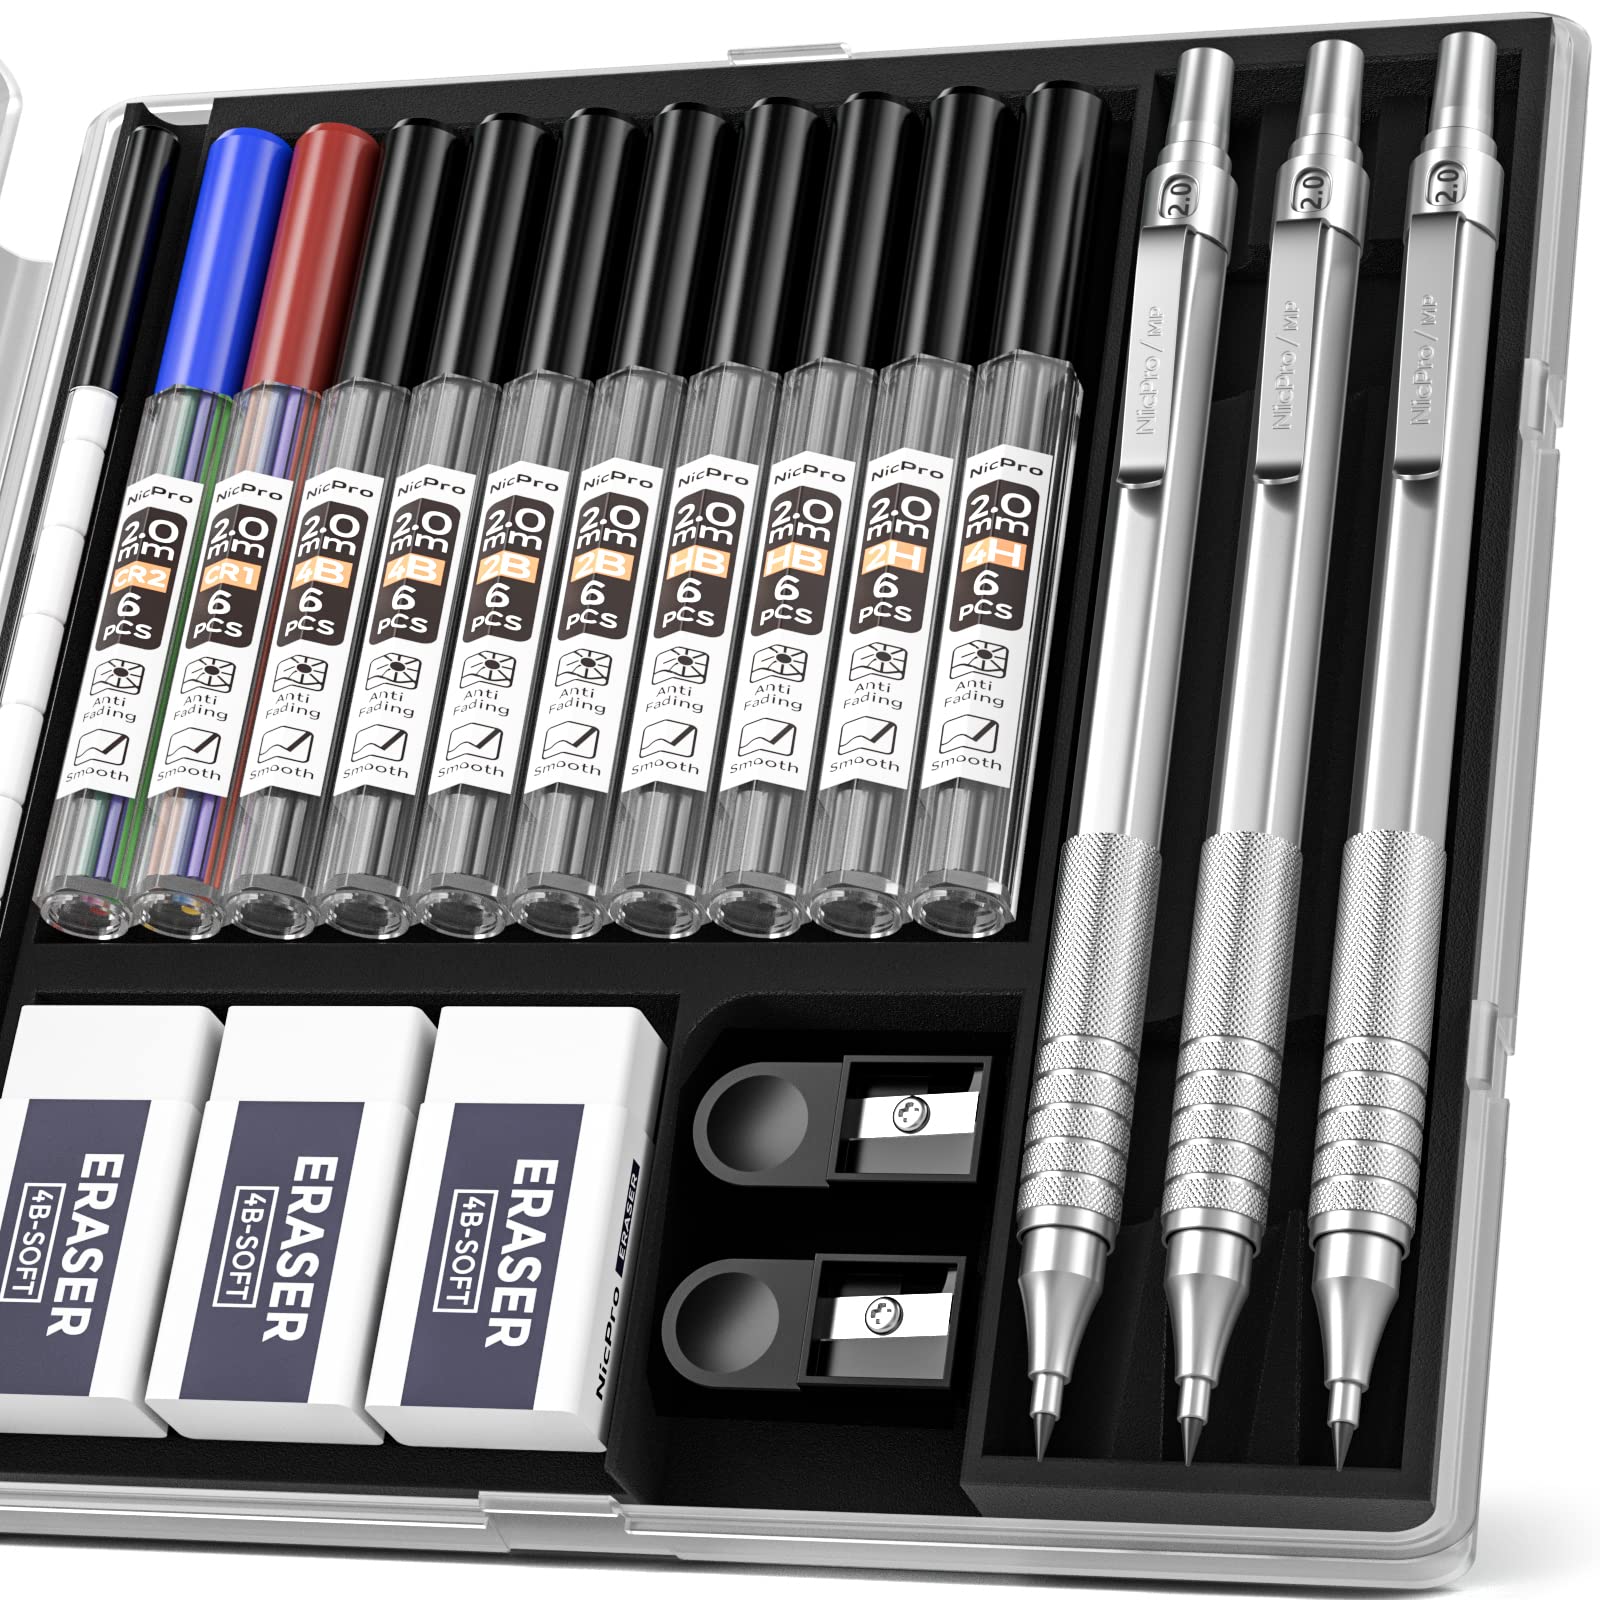 Mechanical pencils & leadholders for drawing, sketching and